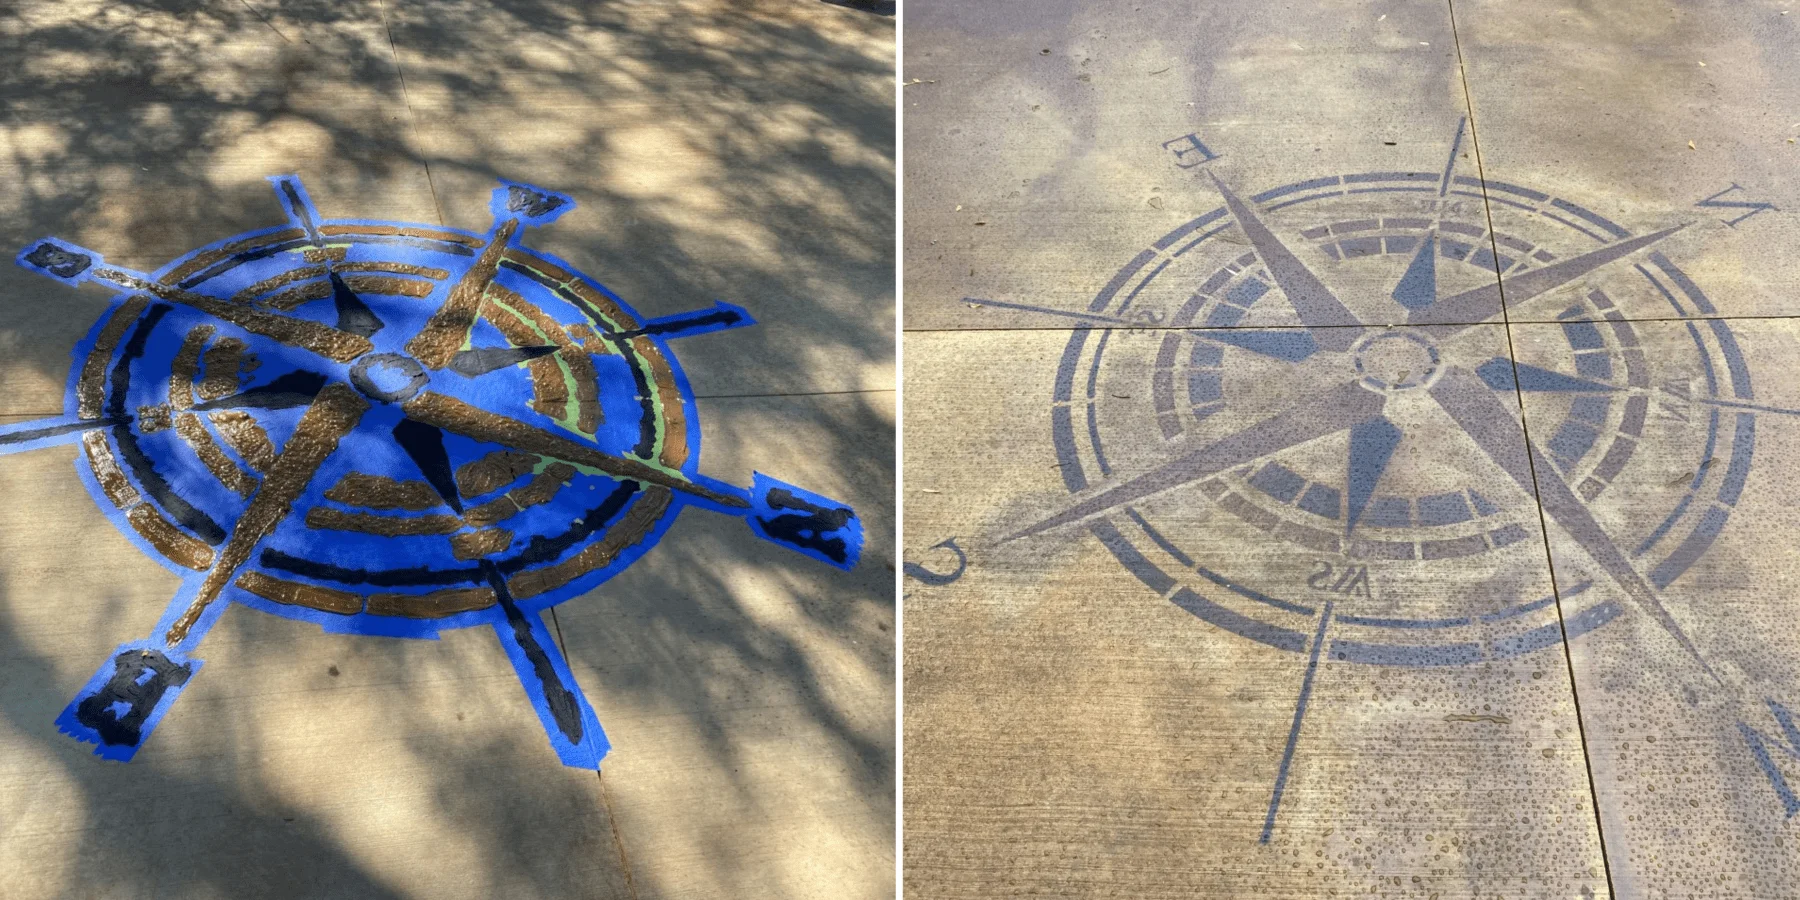 On the left, the compass is outlined with frog's tape and filled english red, coffee brown, and black DecoGel acid stains, giving it a colorful, textured appearance. On the right, the finished compass design shows the detailed work